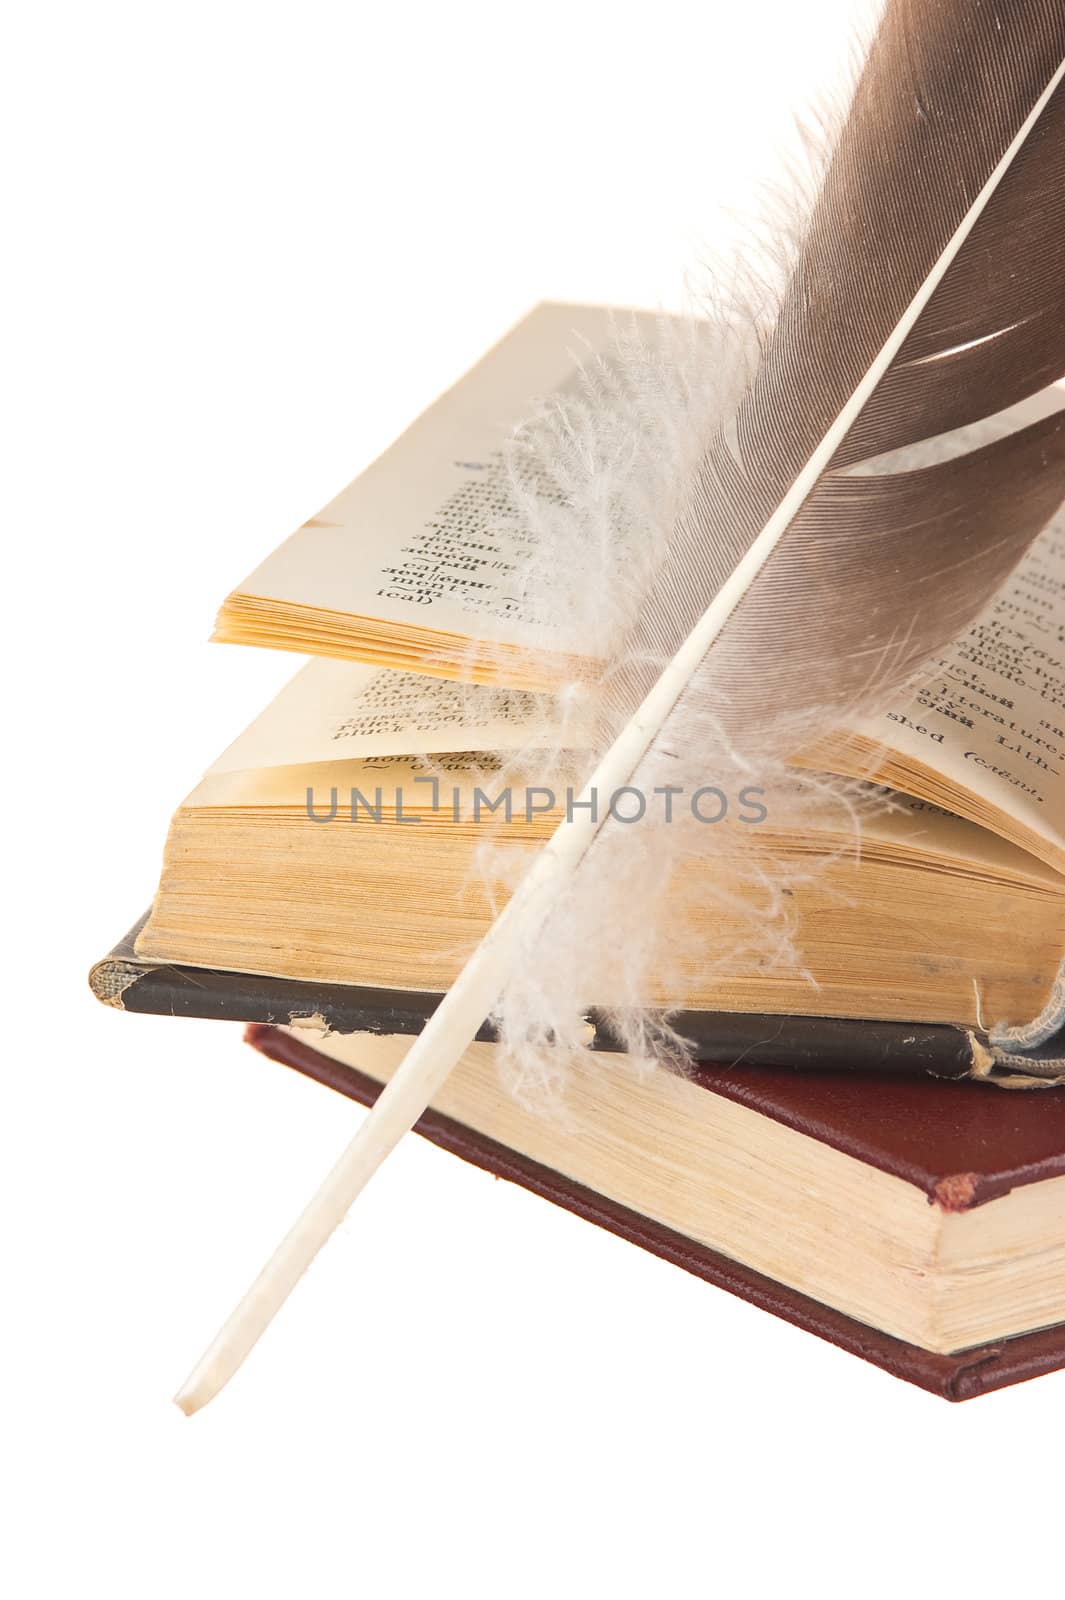 Launched the book with a pen isolated on white background